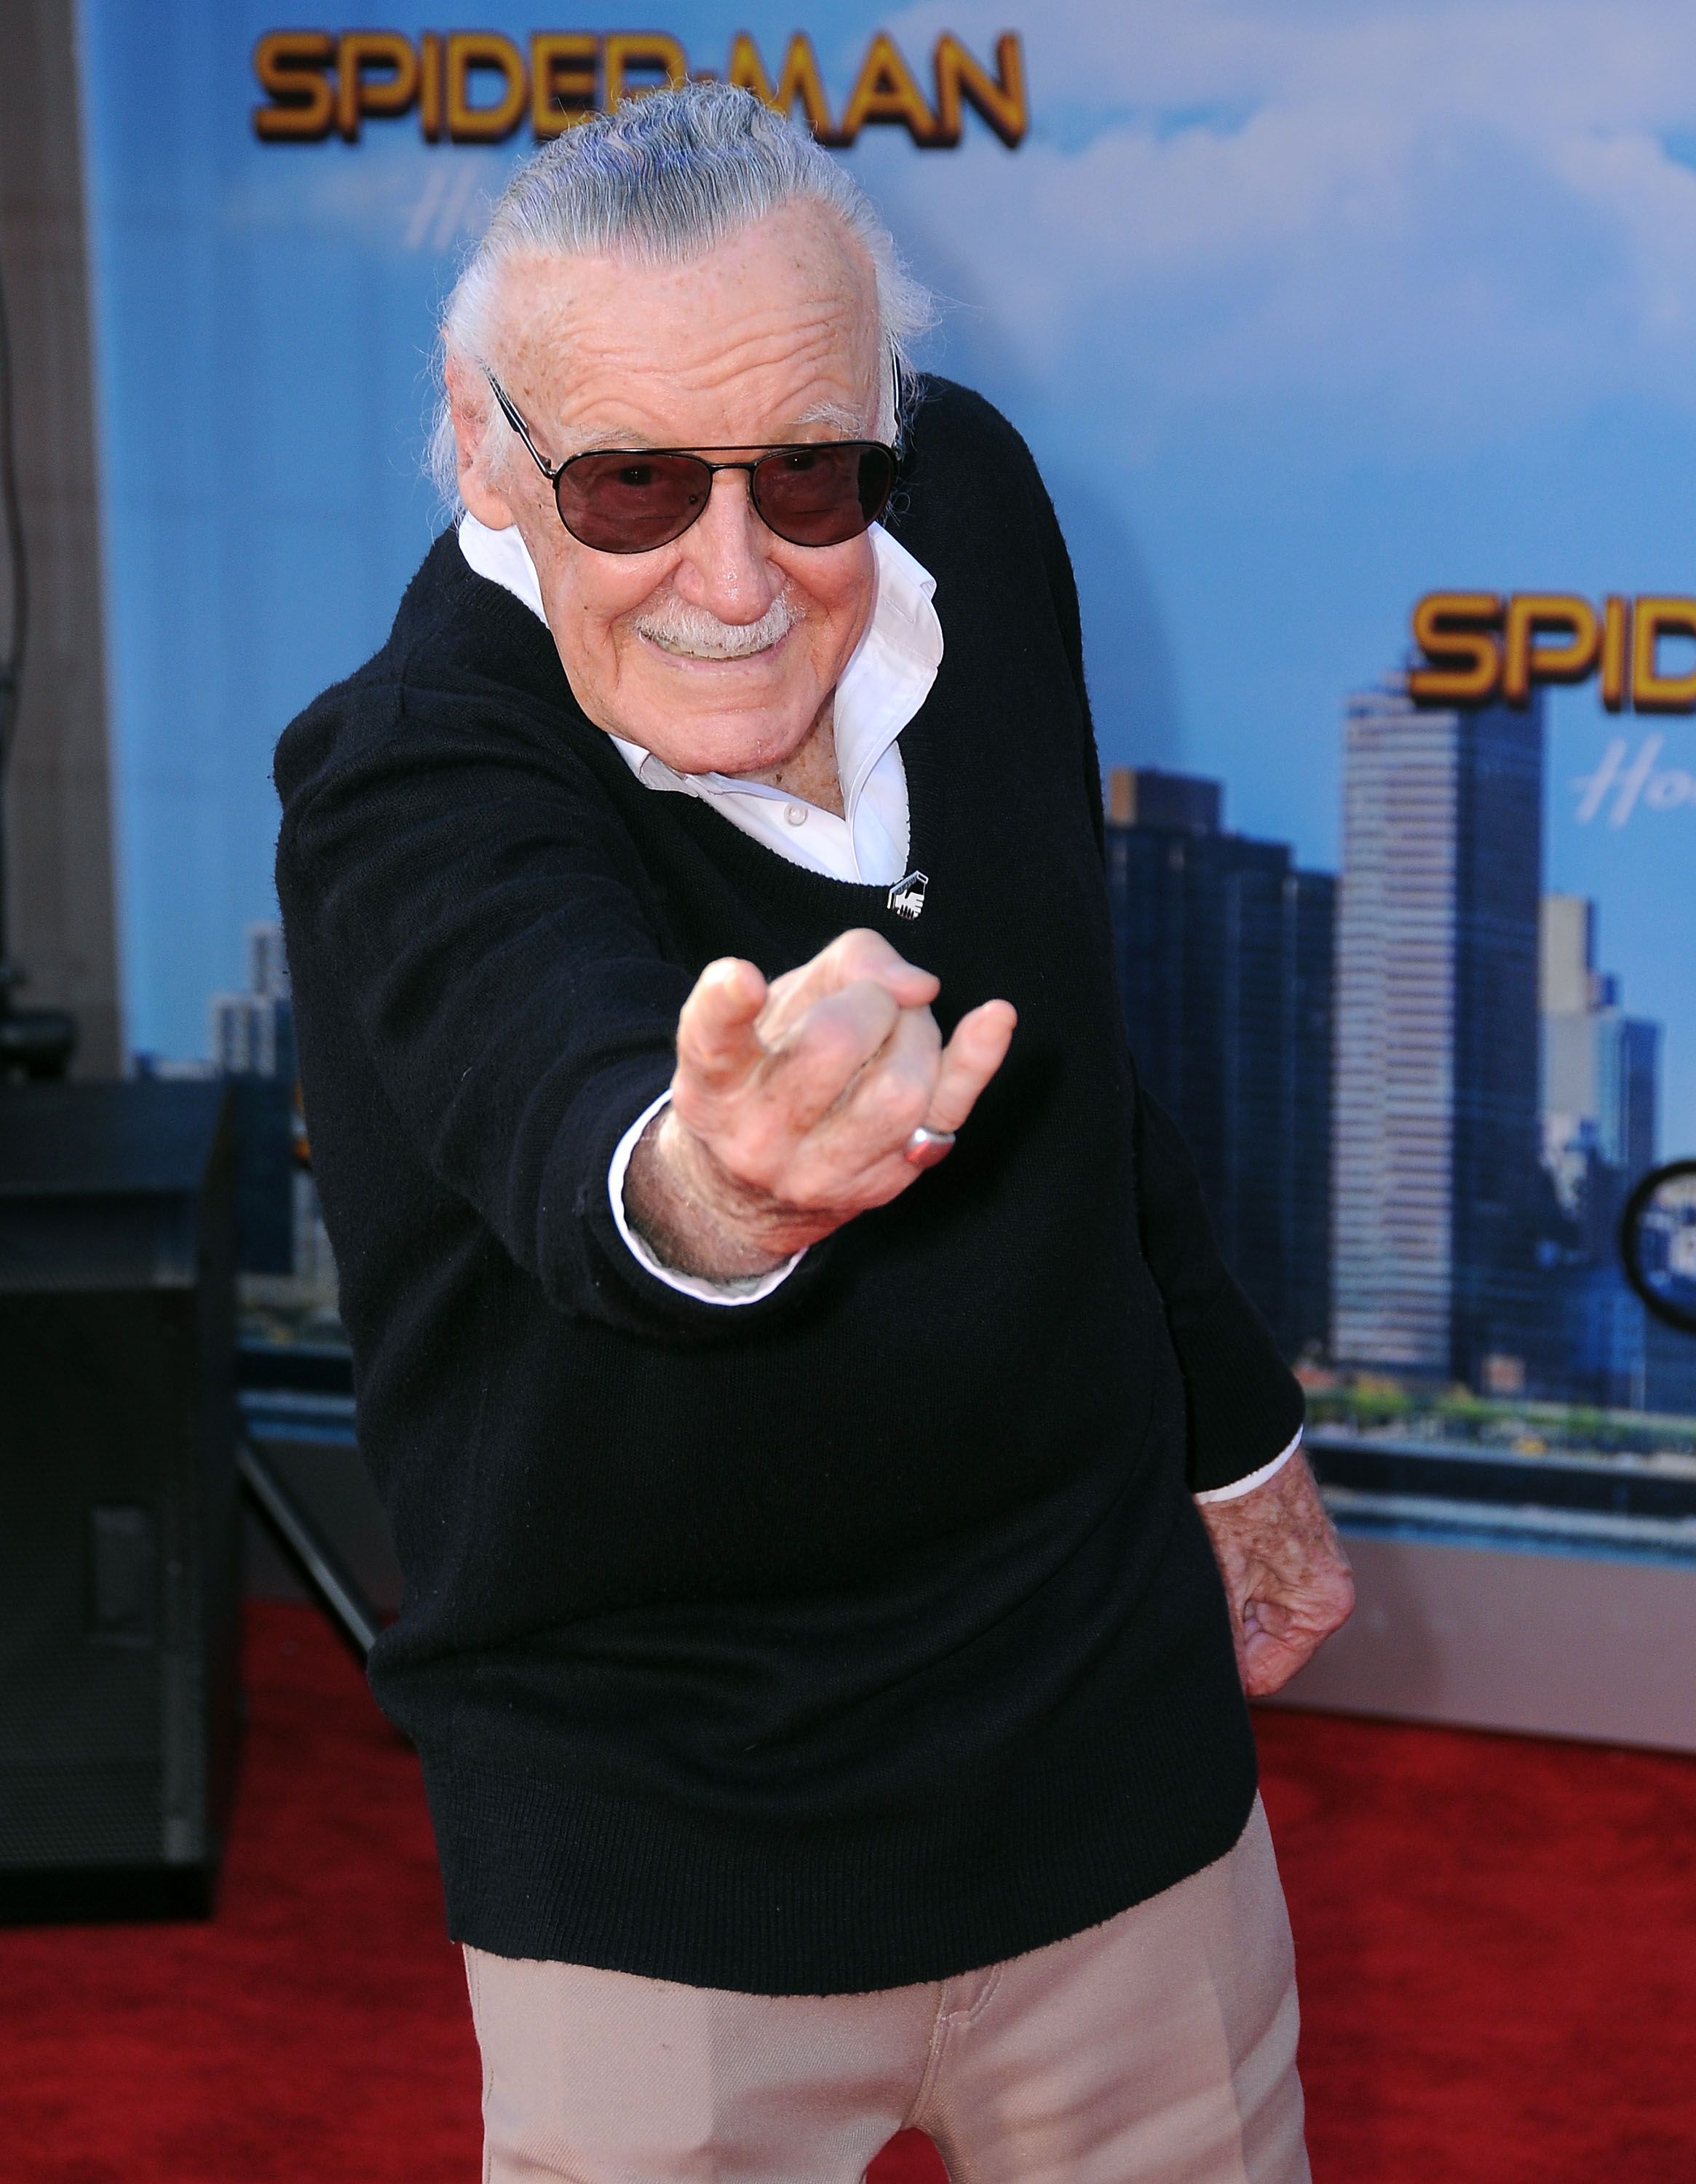 Stan Lee at the premiere of 'Spider-Man: Homecoming' at TCL Chinese Theatre on June 28, 2017 in Hollywood, California. | Source: Getty Images